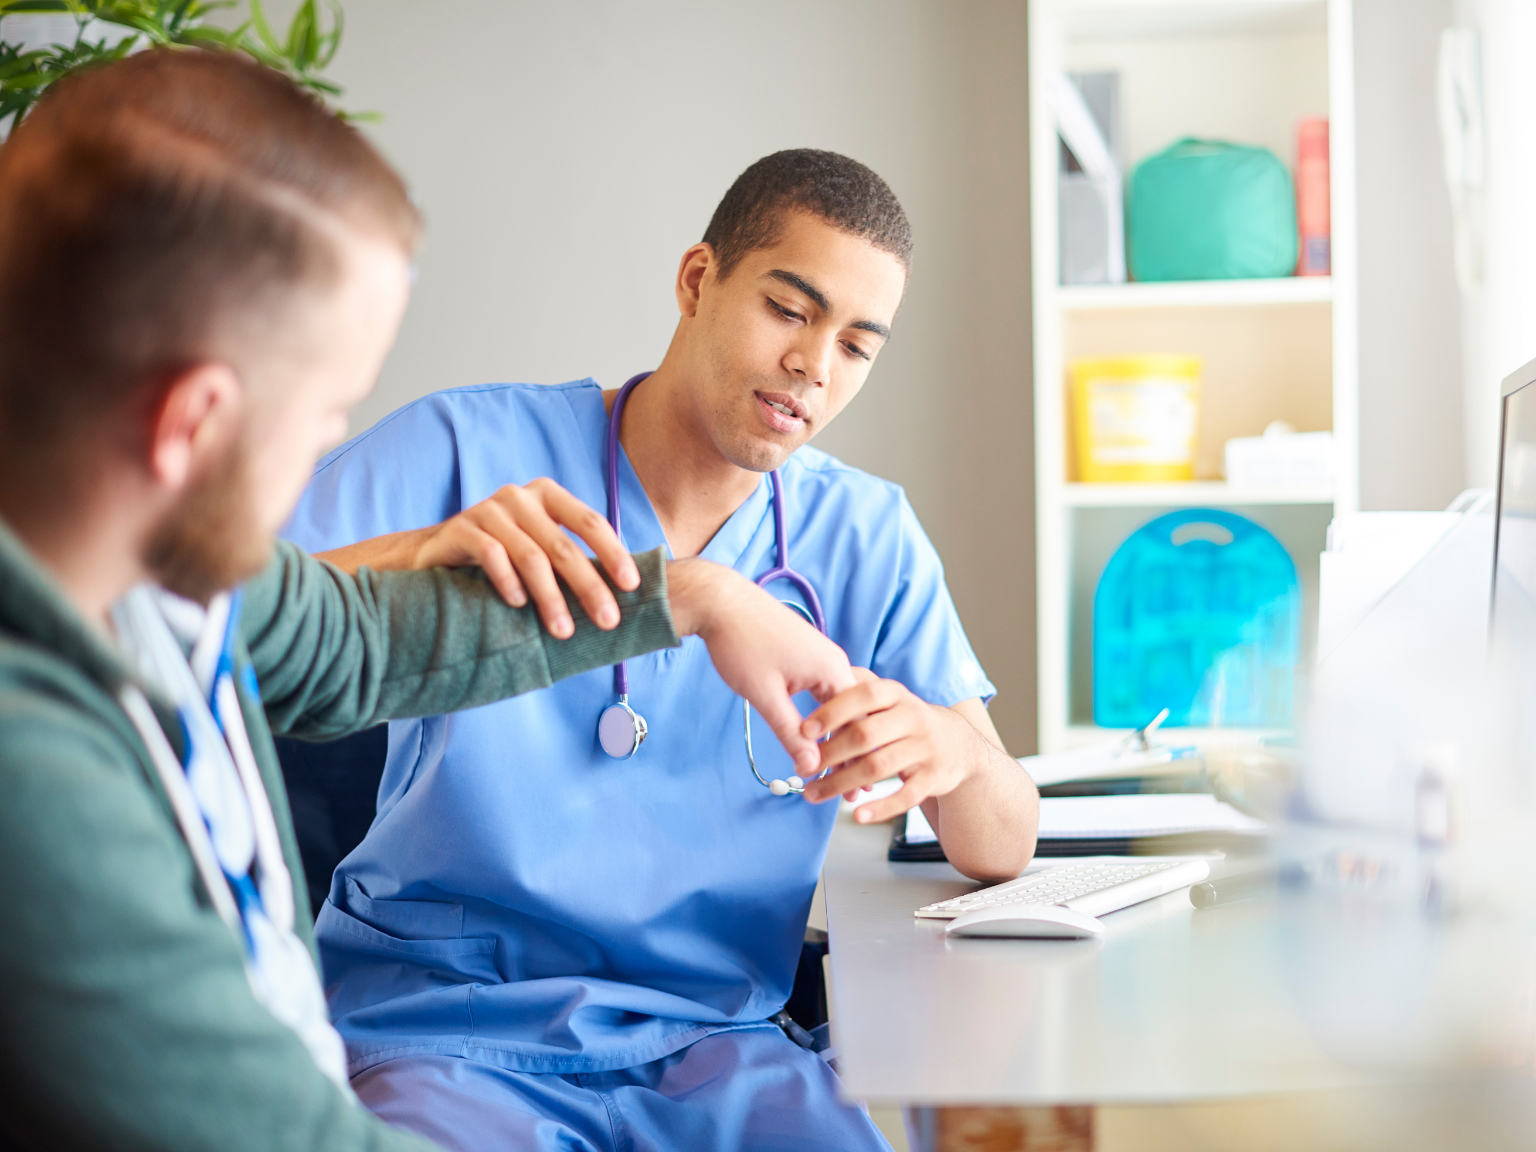 Why Students Should Register With Their New Local General Practitioners